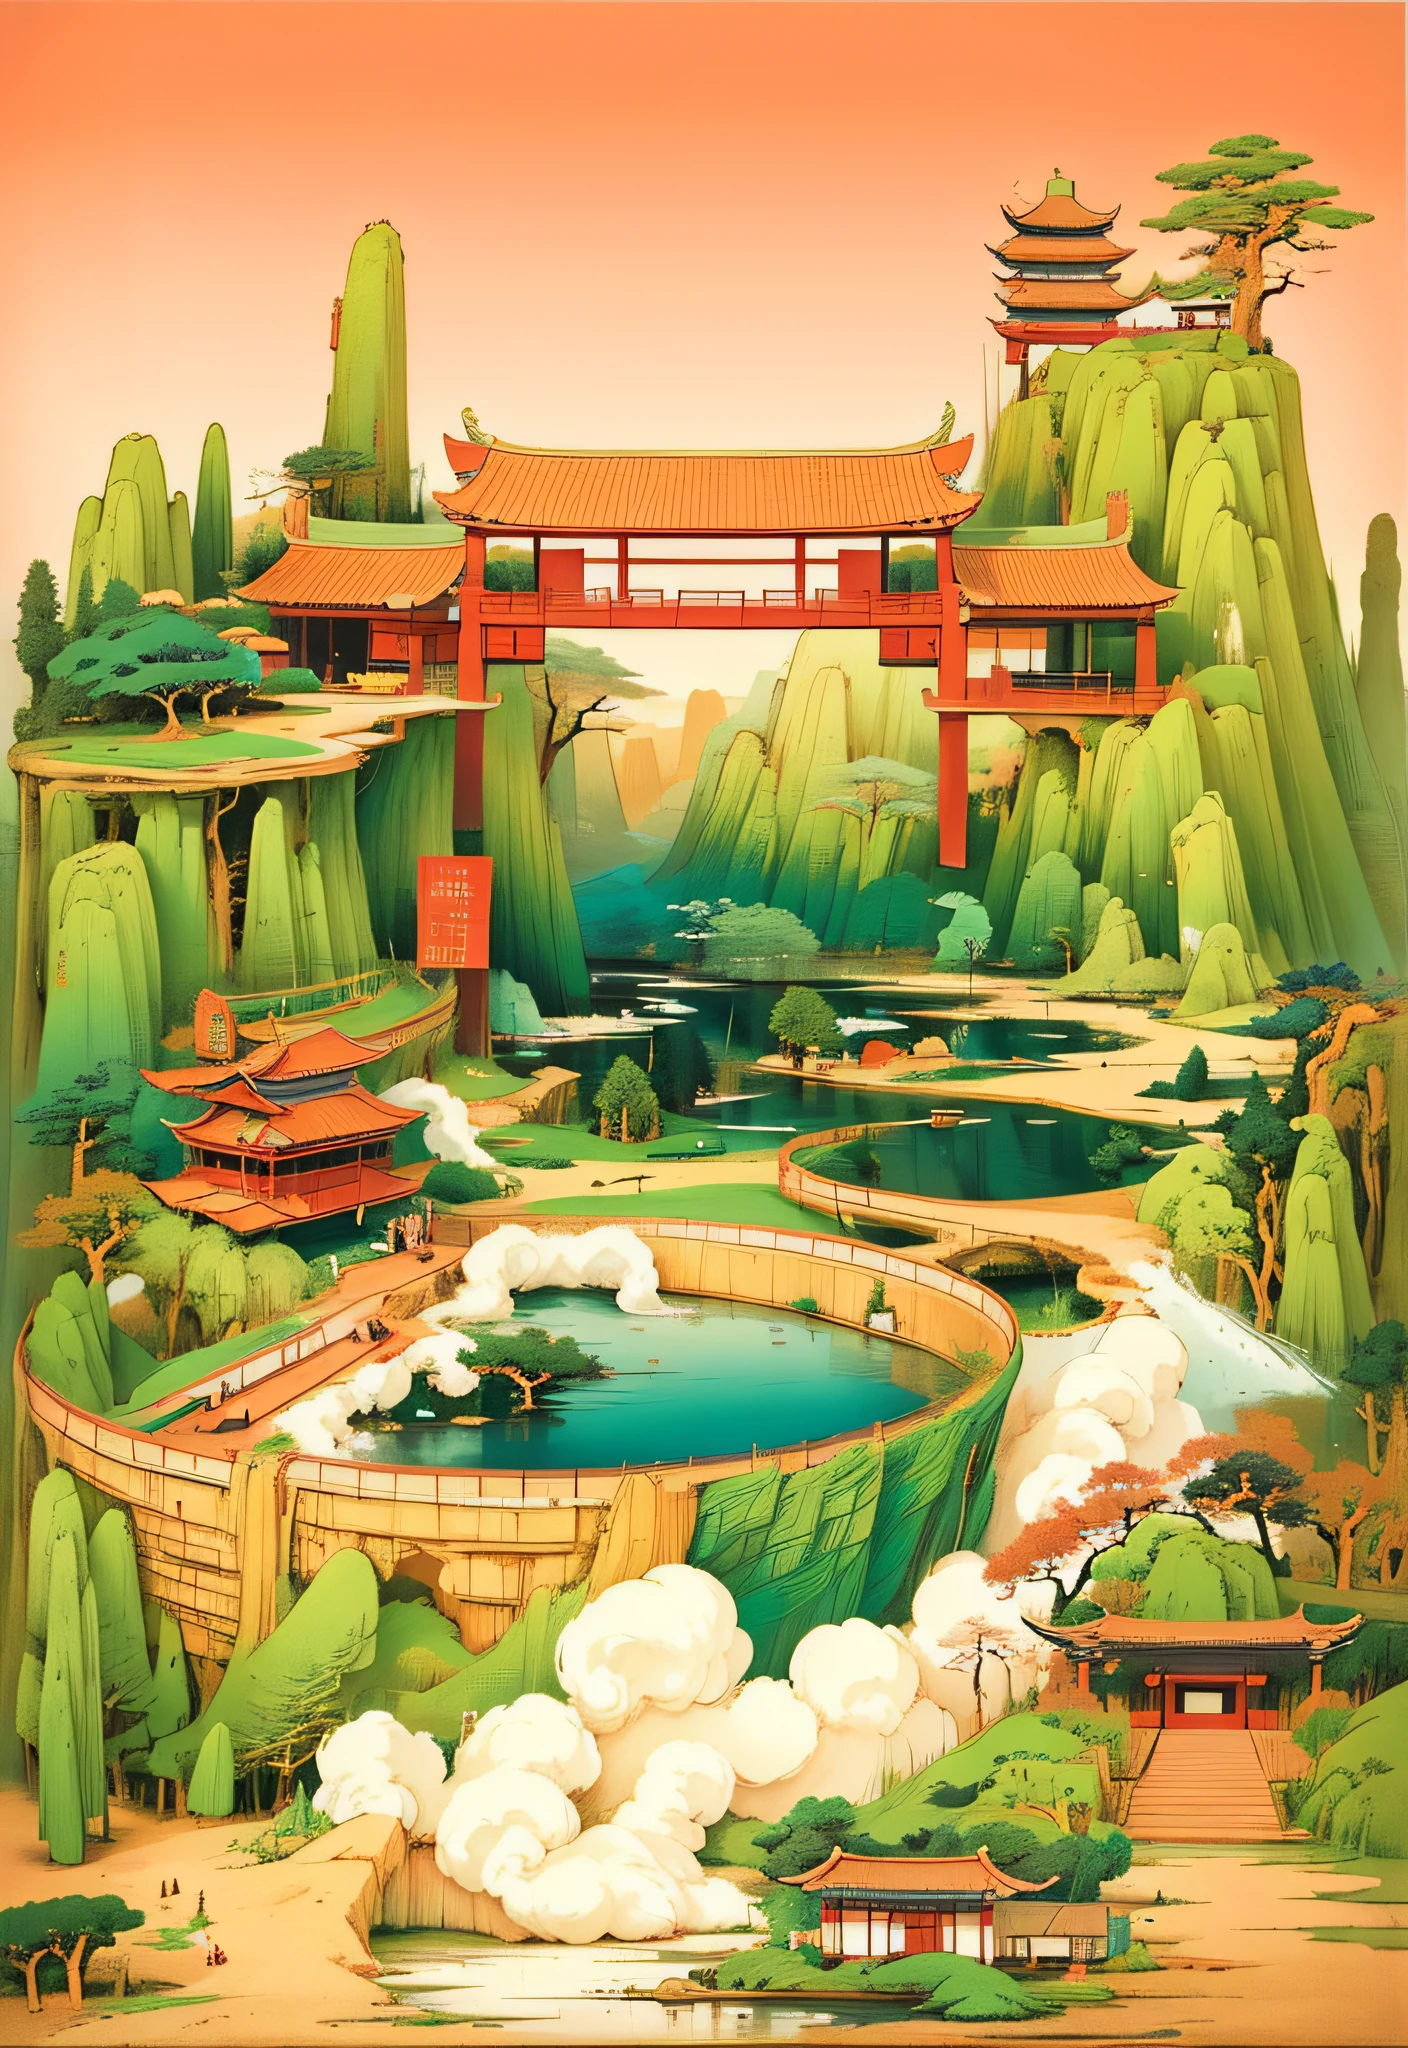 ((tmasterpiece)), ((nice), (high detal), (actual,)) China landscape mountain, ​​clouds, ​​clouds, lake, surface, bowl, Gate, ladder, pylons, wine altars, steamboat, florals, bamboos, ancient buildings, Chinese style architecture, Chinese traditional trend style, illustratio, Soft style and dreamy atmosphere, Bochen, photorealistic technology, Meticulous technology,  big breasts and big breasts , zen aesthetic, Illustration poster design, Graphic design, Beautiful ancient Chinese architecture, ​​clouds, blossoms, water flowing, Abstract illustration, rim-light, dream, fanciful, Vector line drawing, Surreal